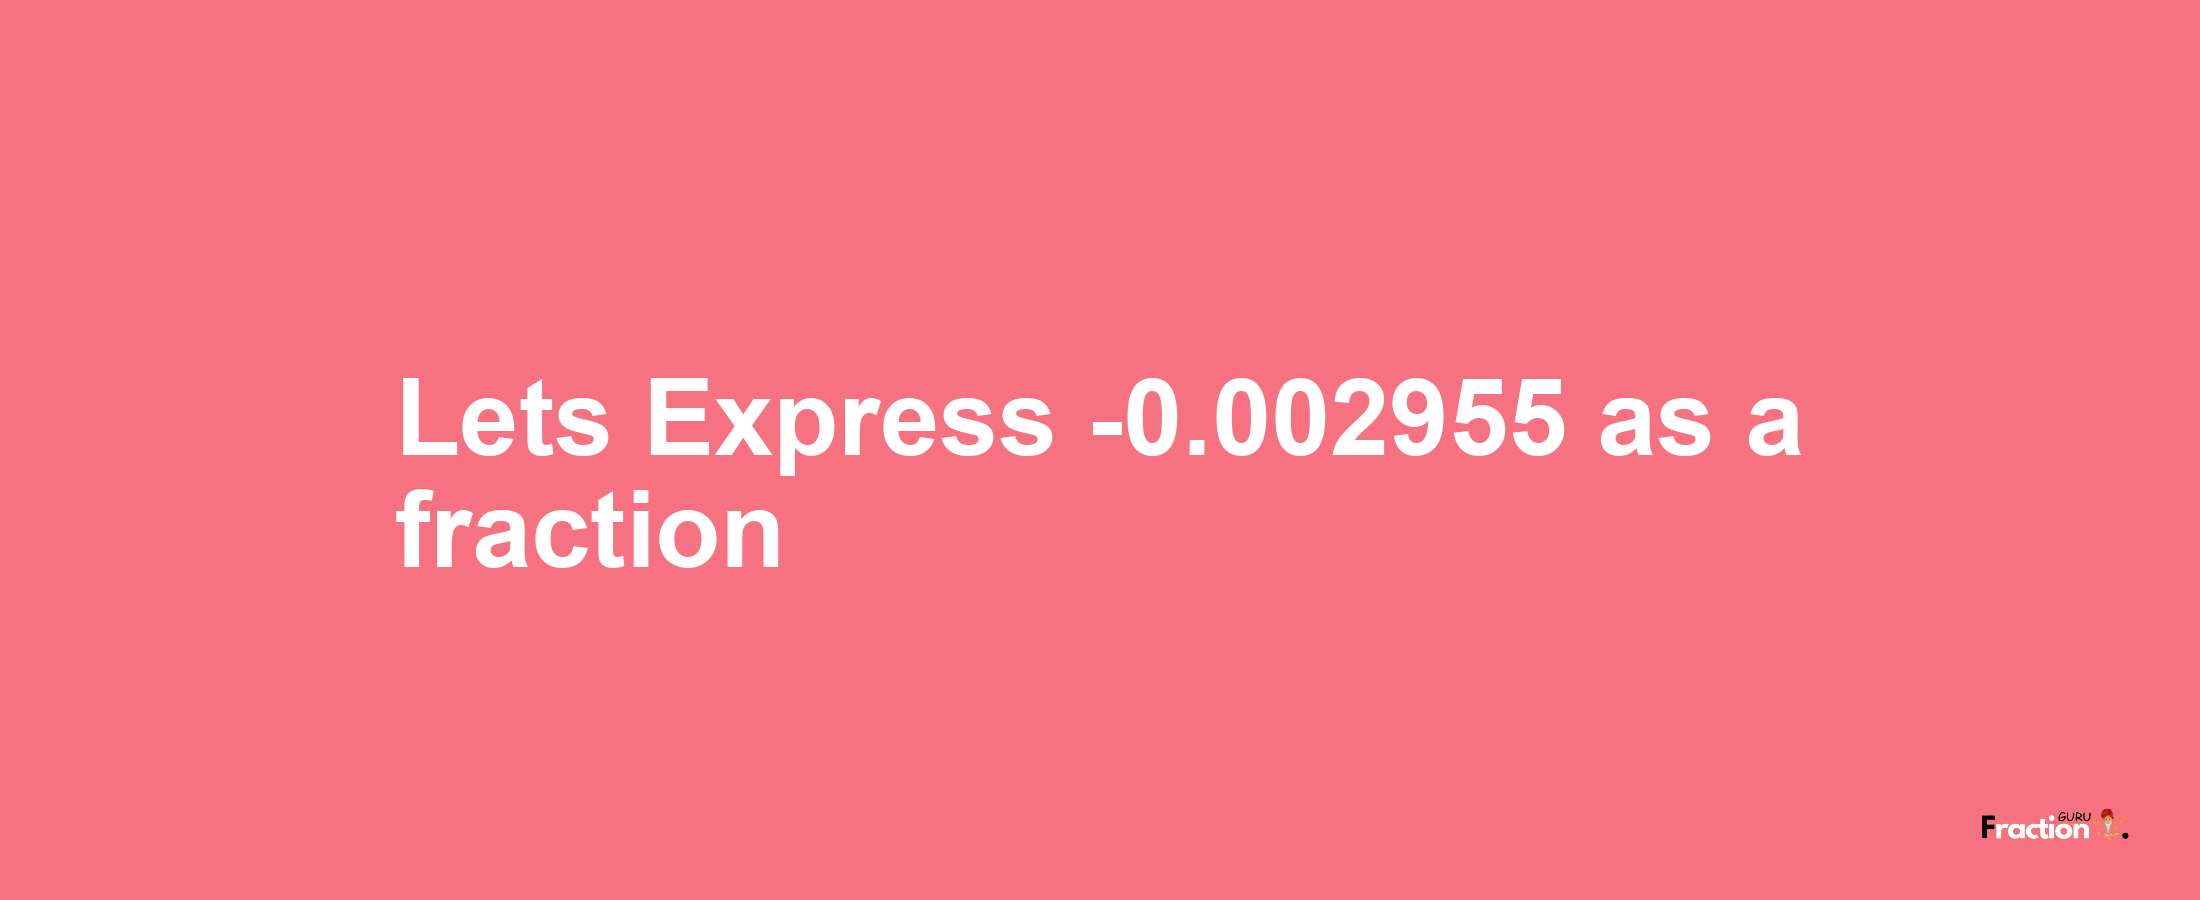 Lets Express -0.002955 as afraction